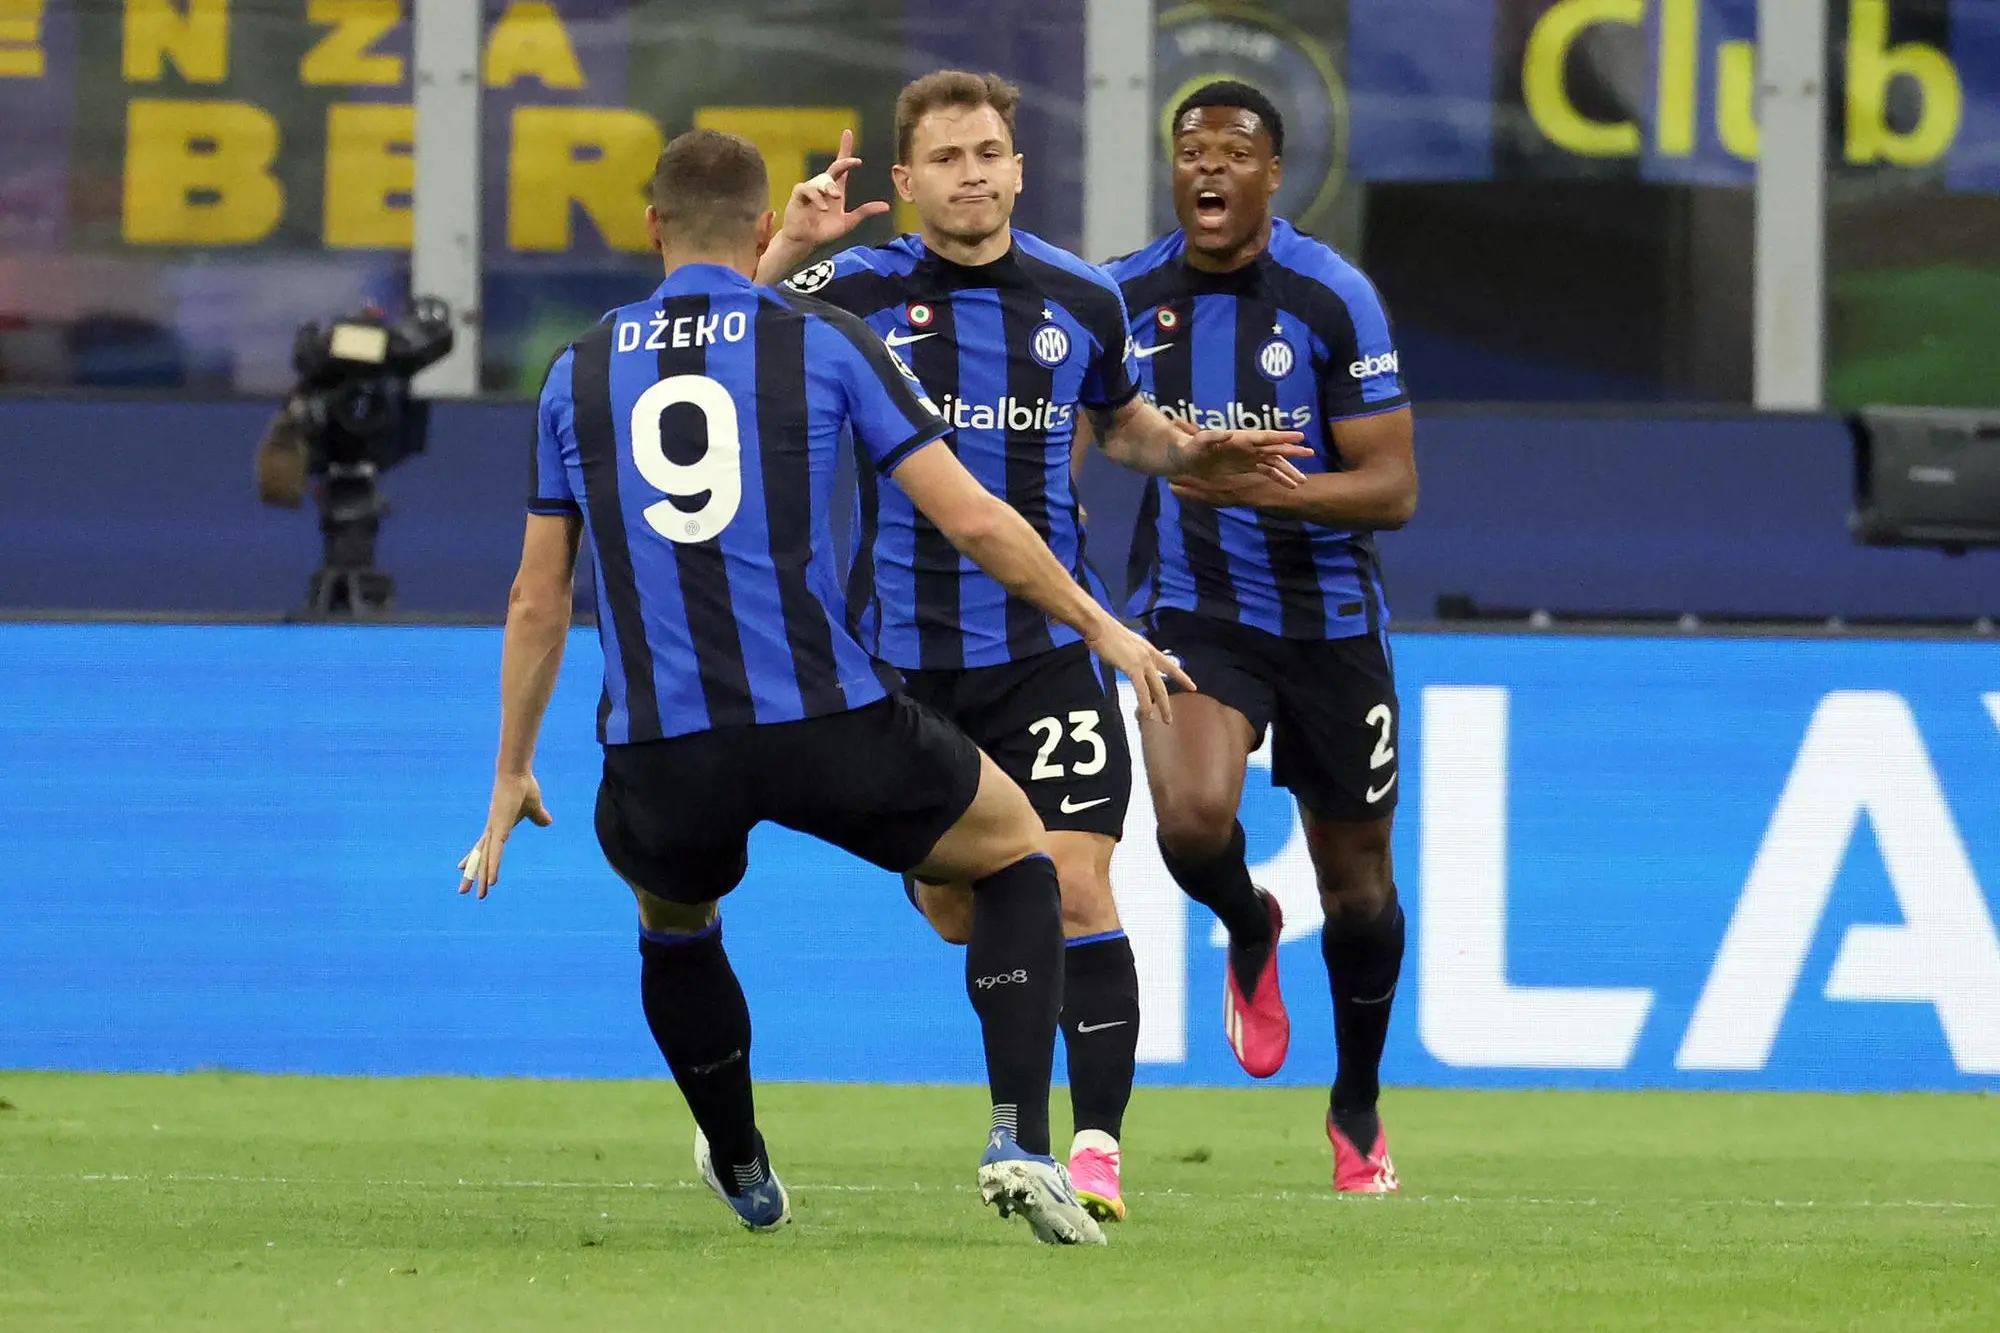 Inter Milan’s Nicolo Barella (C) jubilates with his teammates Edin Dzeko (L) and Denzel Dumfries after scoring goal of 1 to 0 during the UEFA Champions League second leg of quarter final match between FC Inter and Benfica at Giuseppe Meazza stadium in Milan, 19 April 2023. ANSA / MATTEO BAZZI